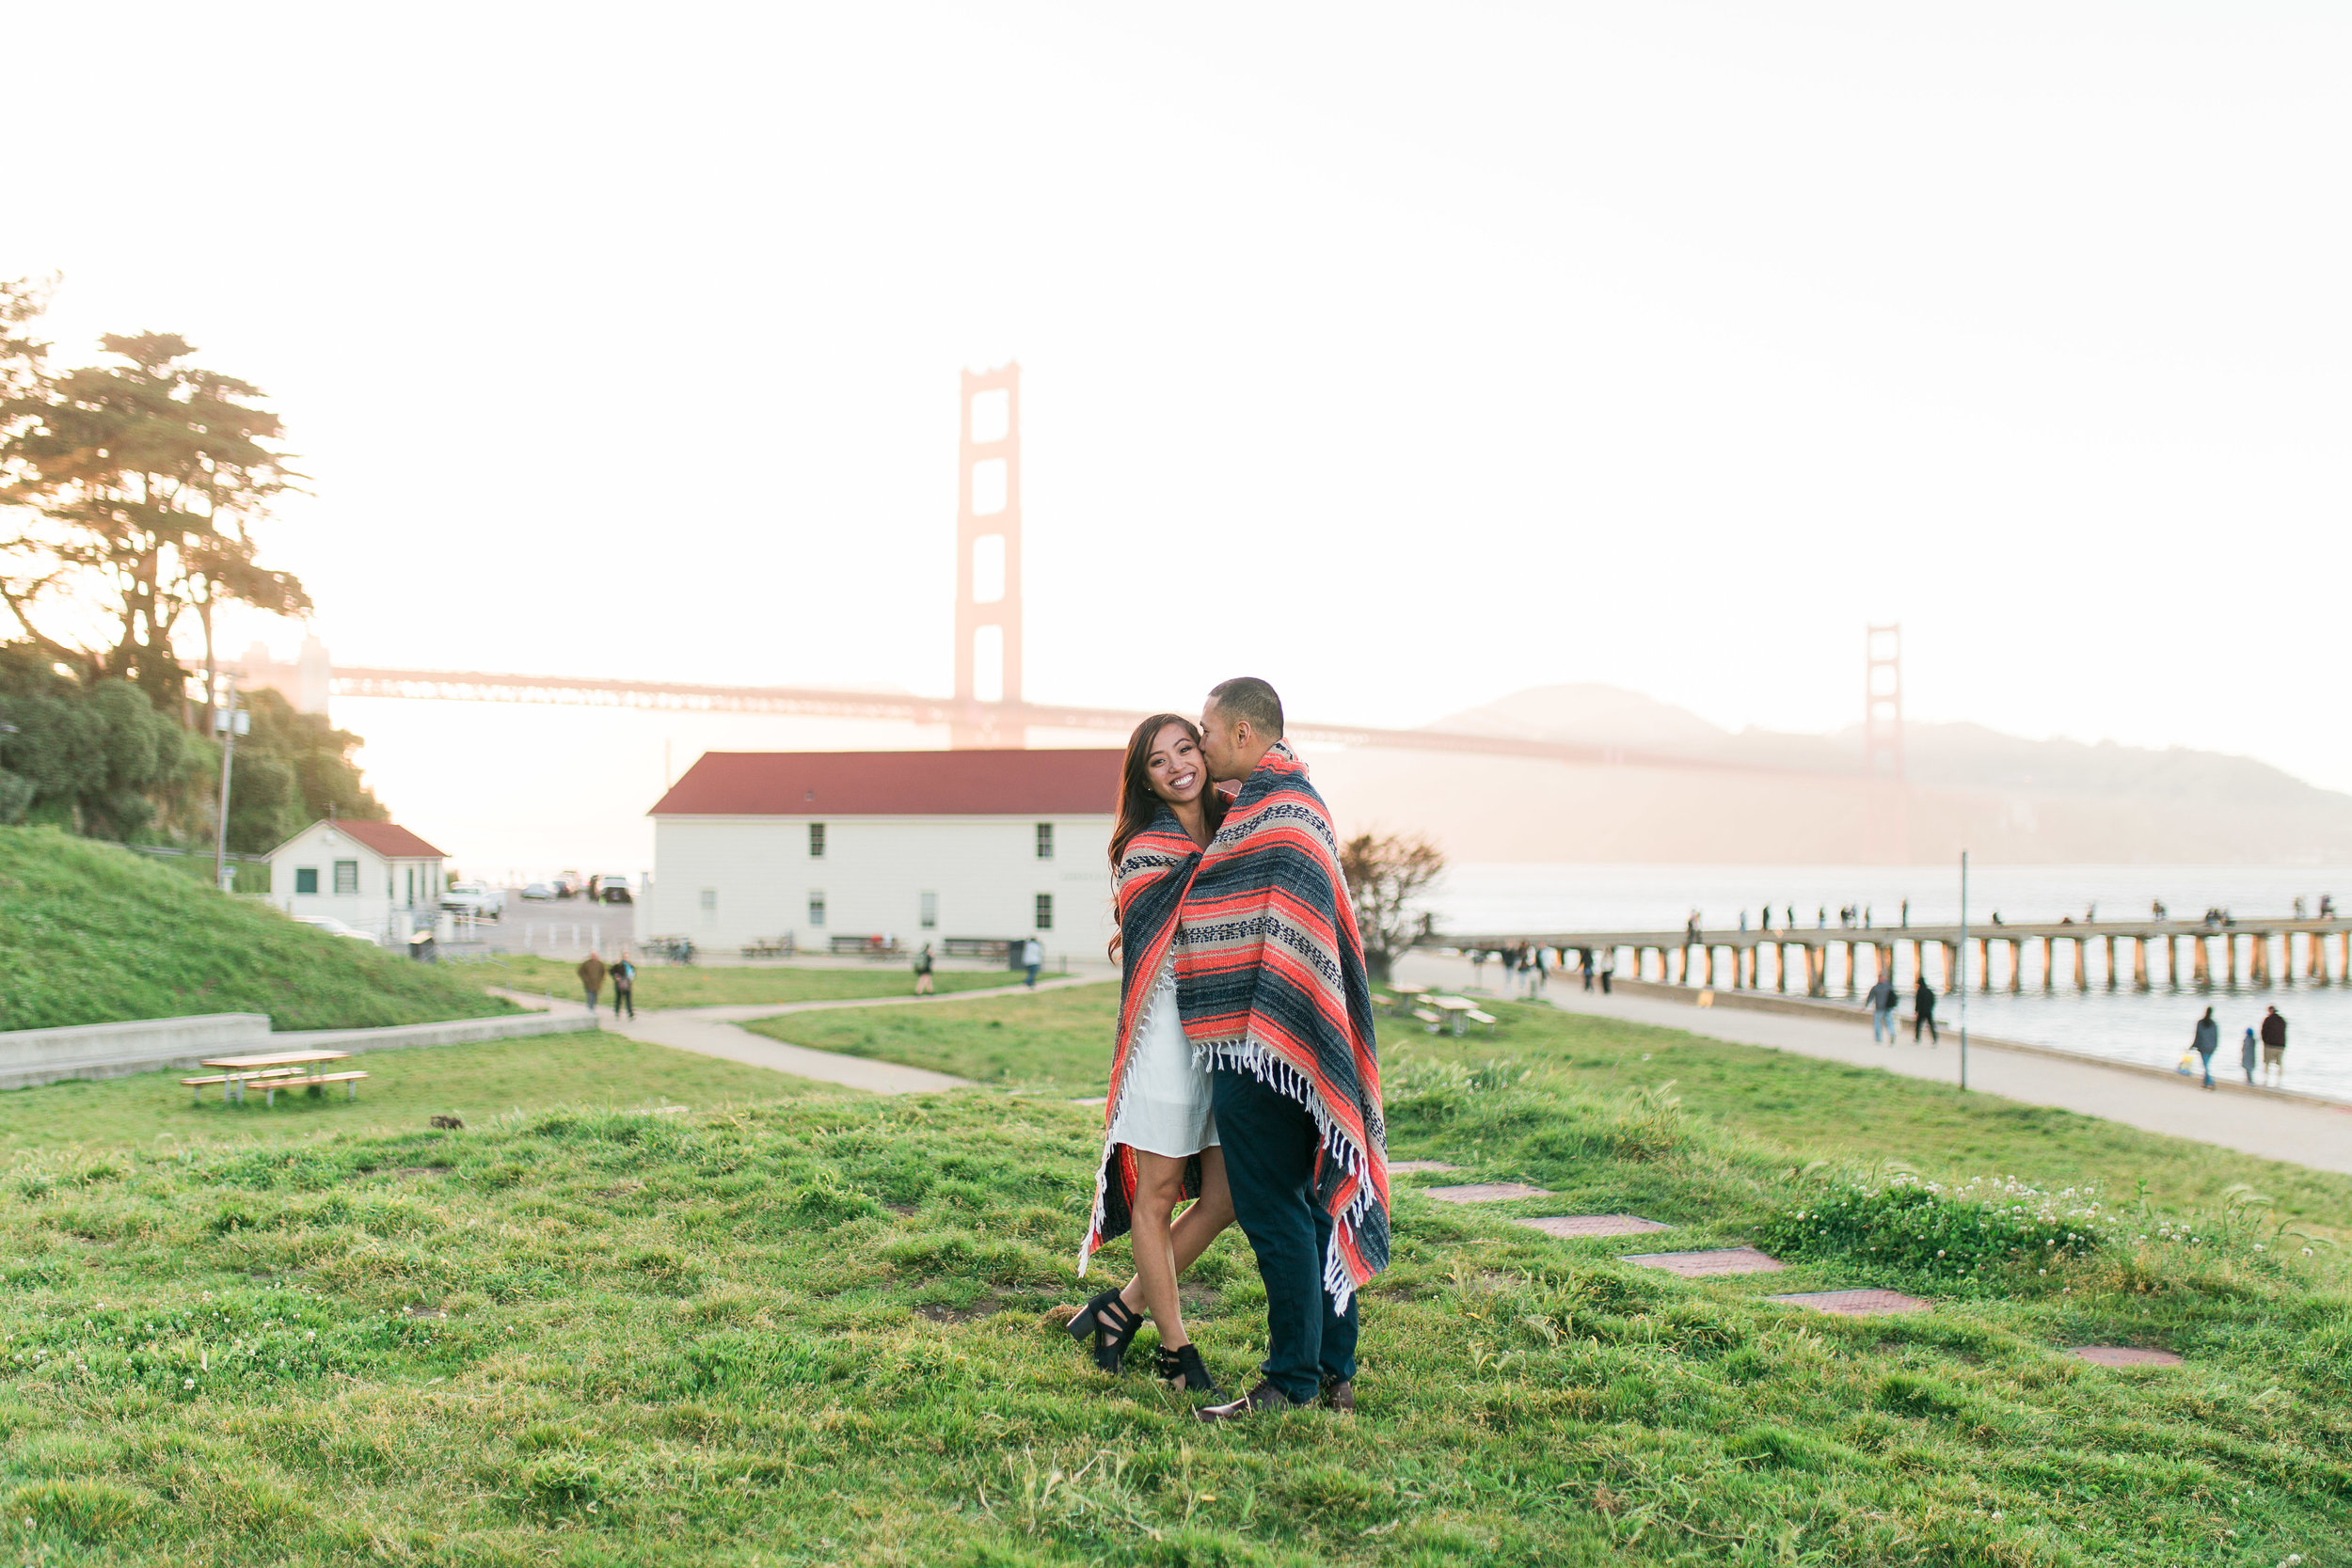 Best Engagement Photo Locations in SF - Crissy Field Engagement Photos by JBJ Pictures (1).jpg